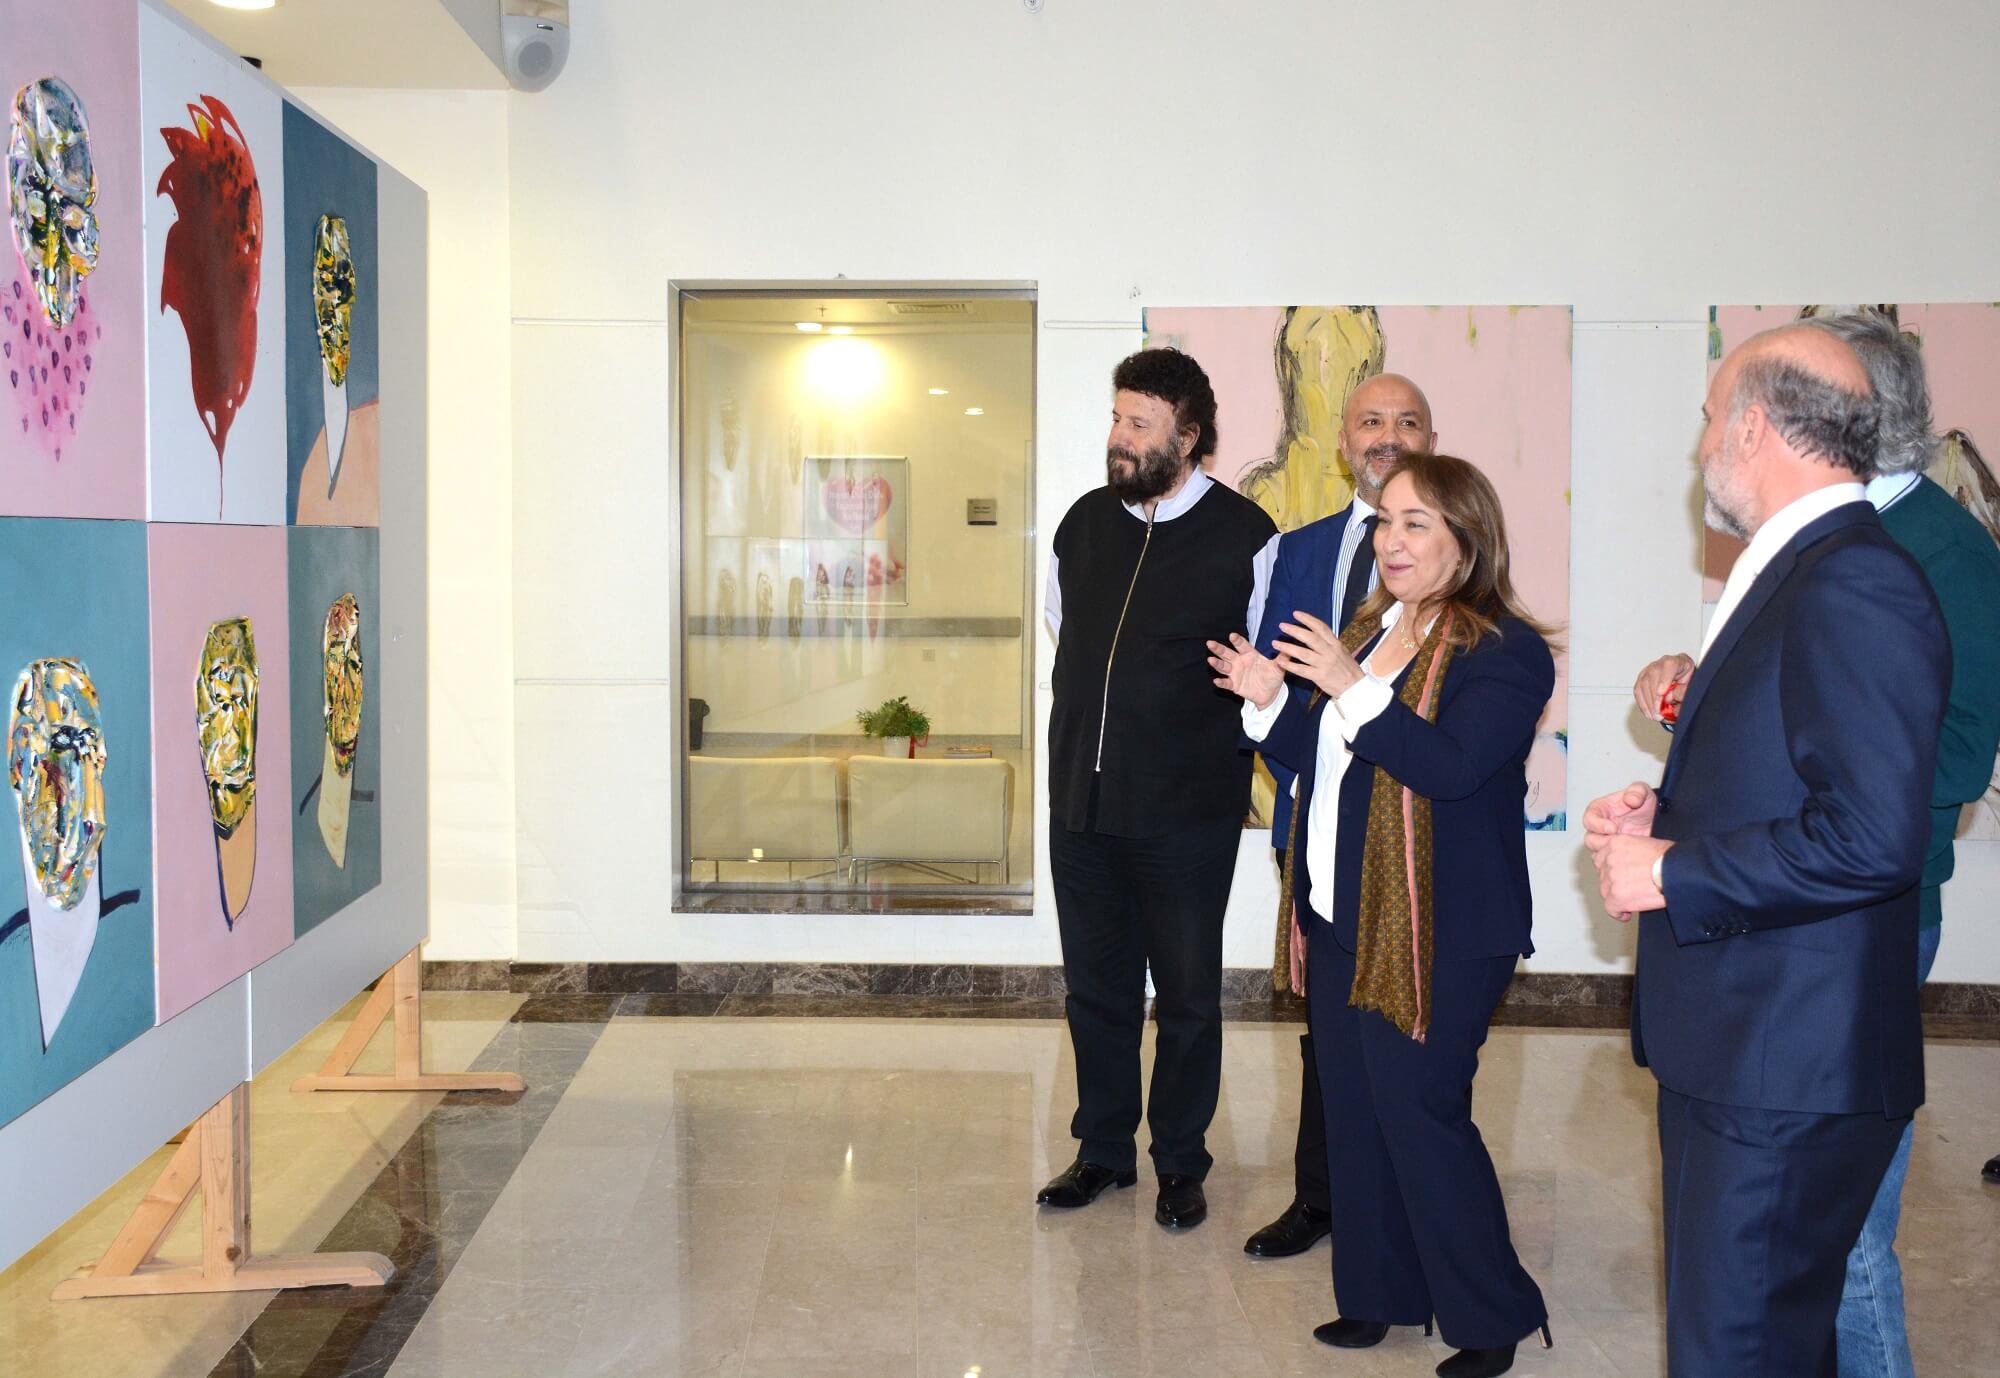 Exhibition of Turkish Artists’ 40 Paintings “Painting Exhibition of Turkish Artists” has been opened at the Near East University